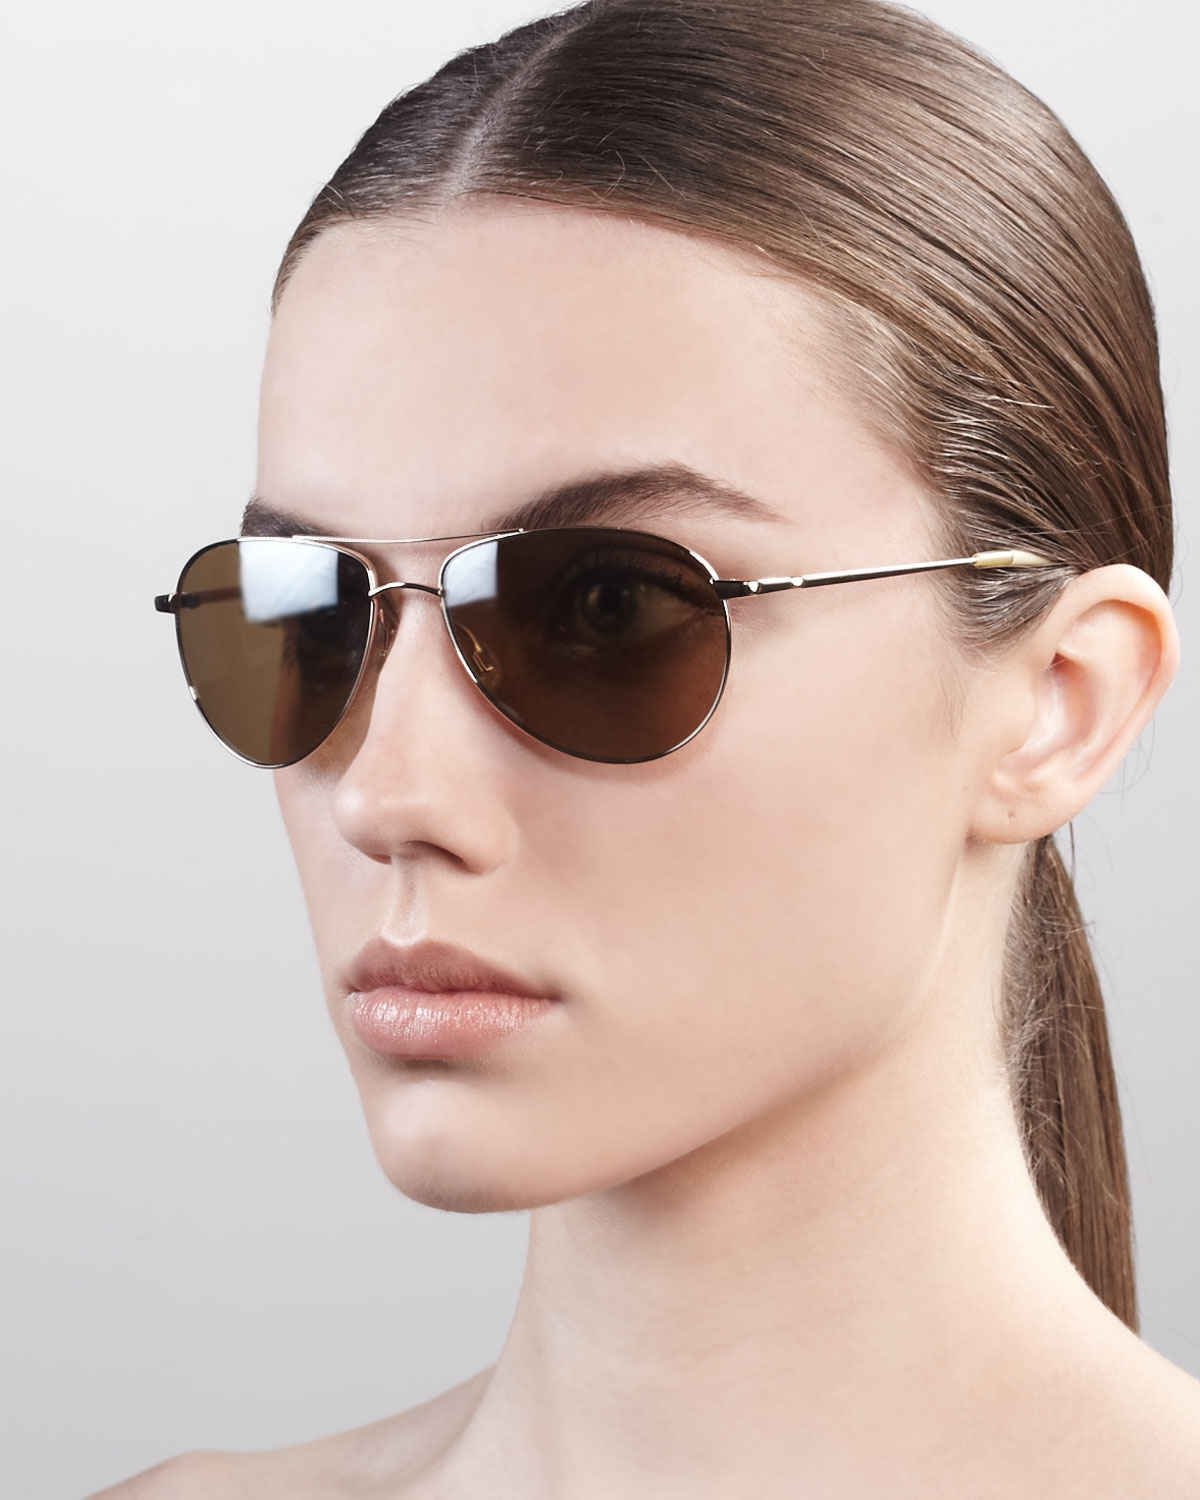 Lyst - Oliver peoples Benedict Basic Aviators Goldensmoky in Brown